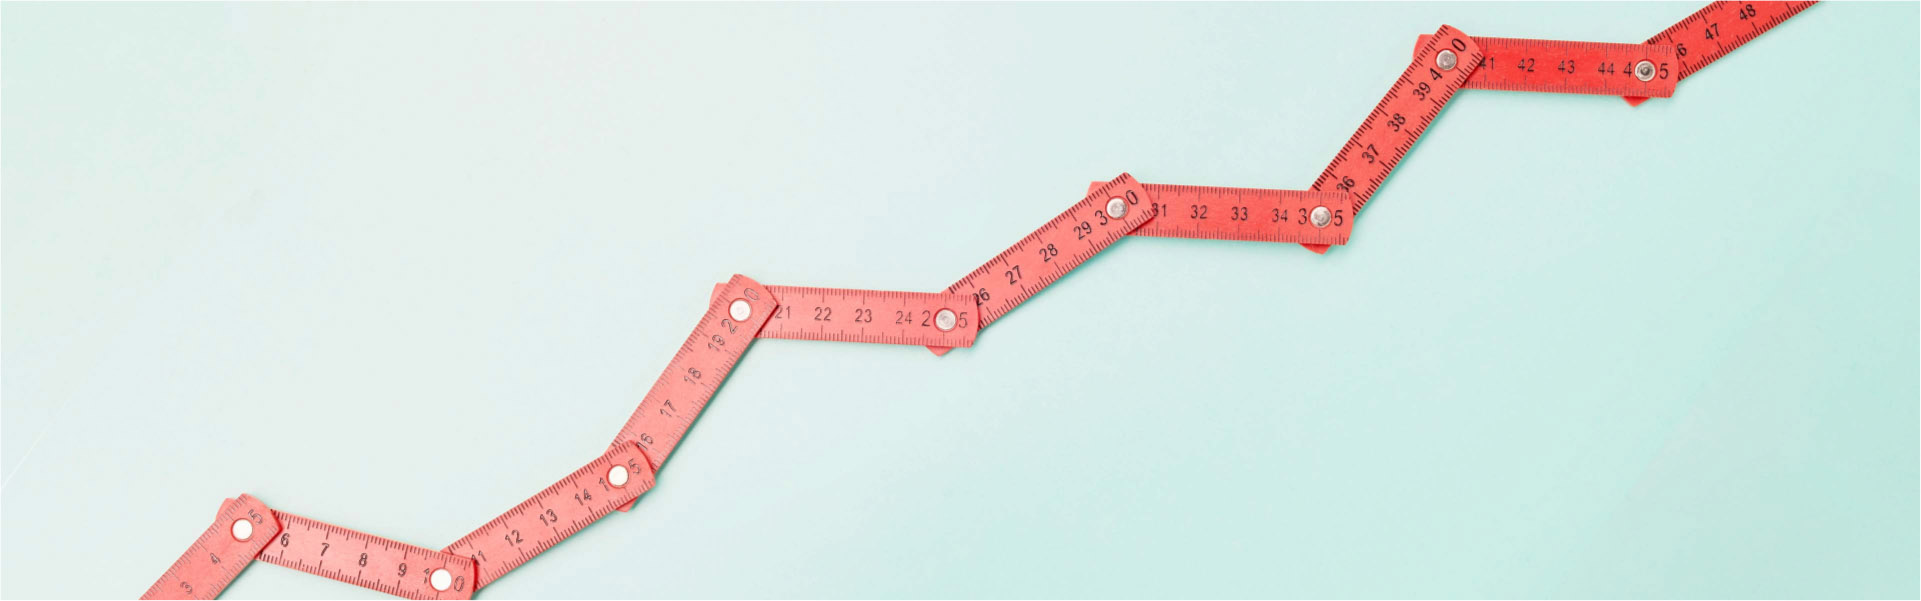 High angle view of a red folding ruler in shape of a falling stock curve on turquoise background.